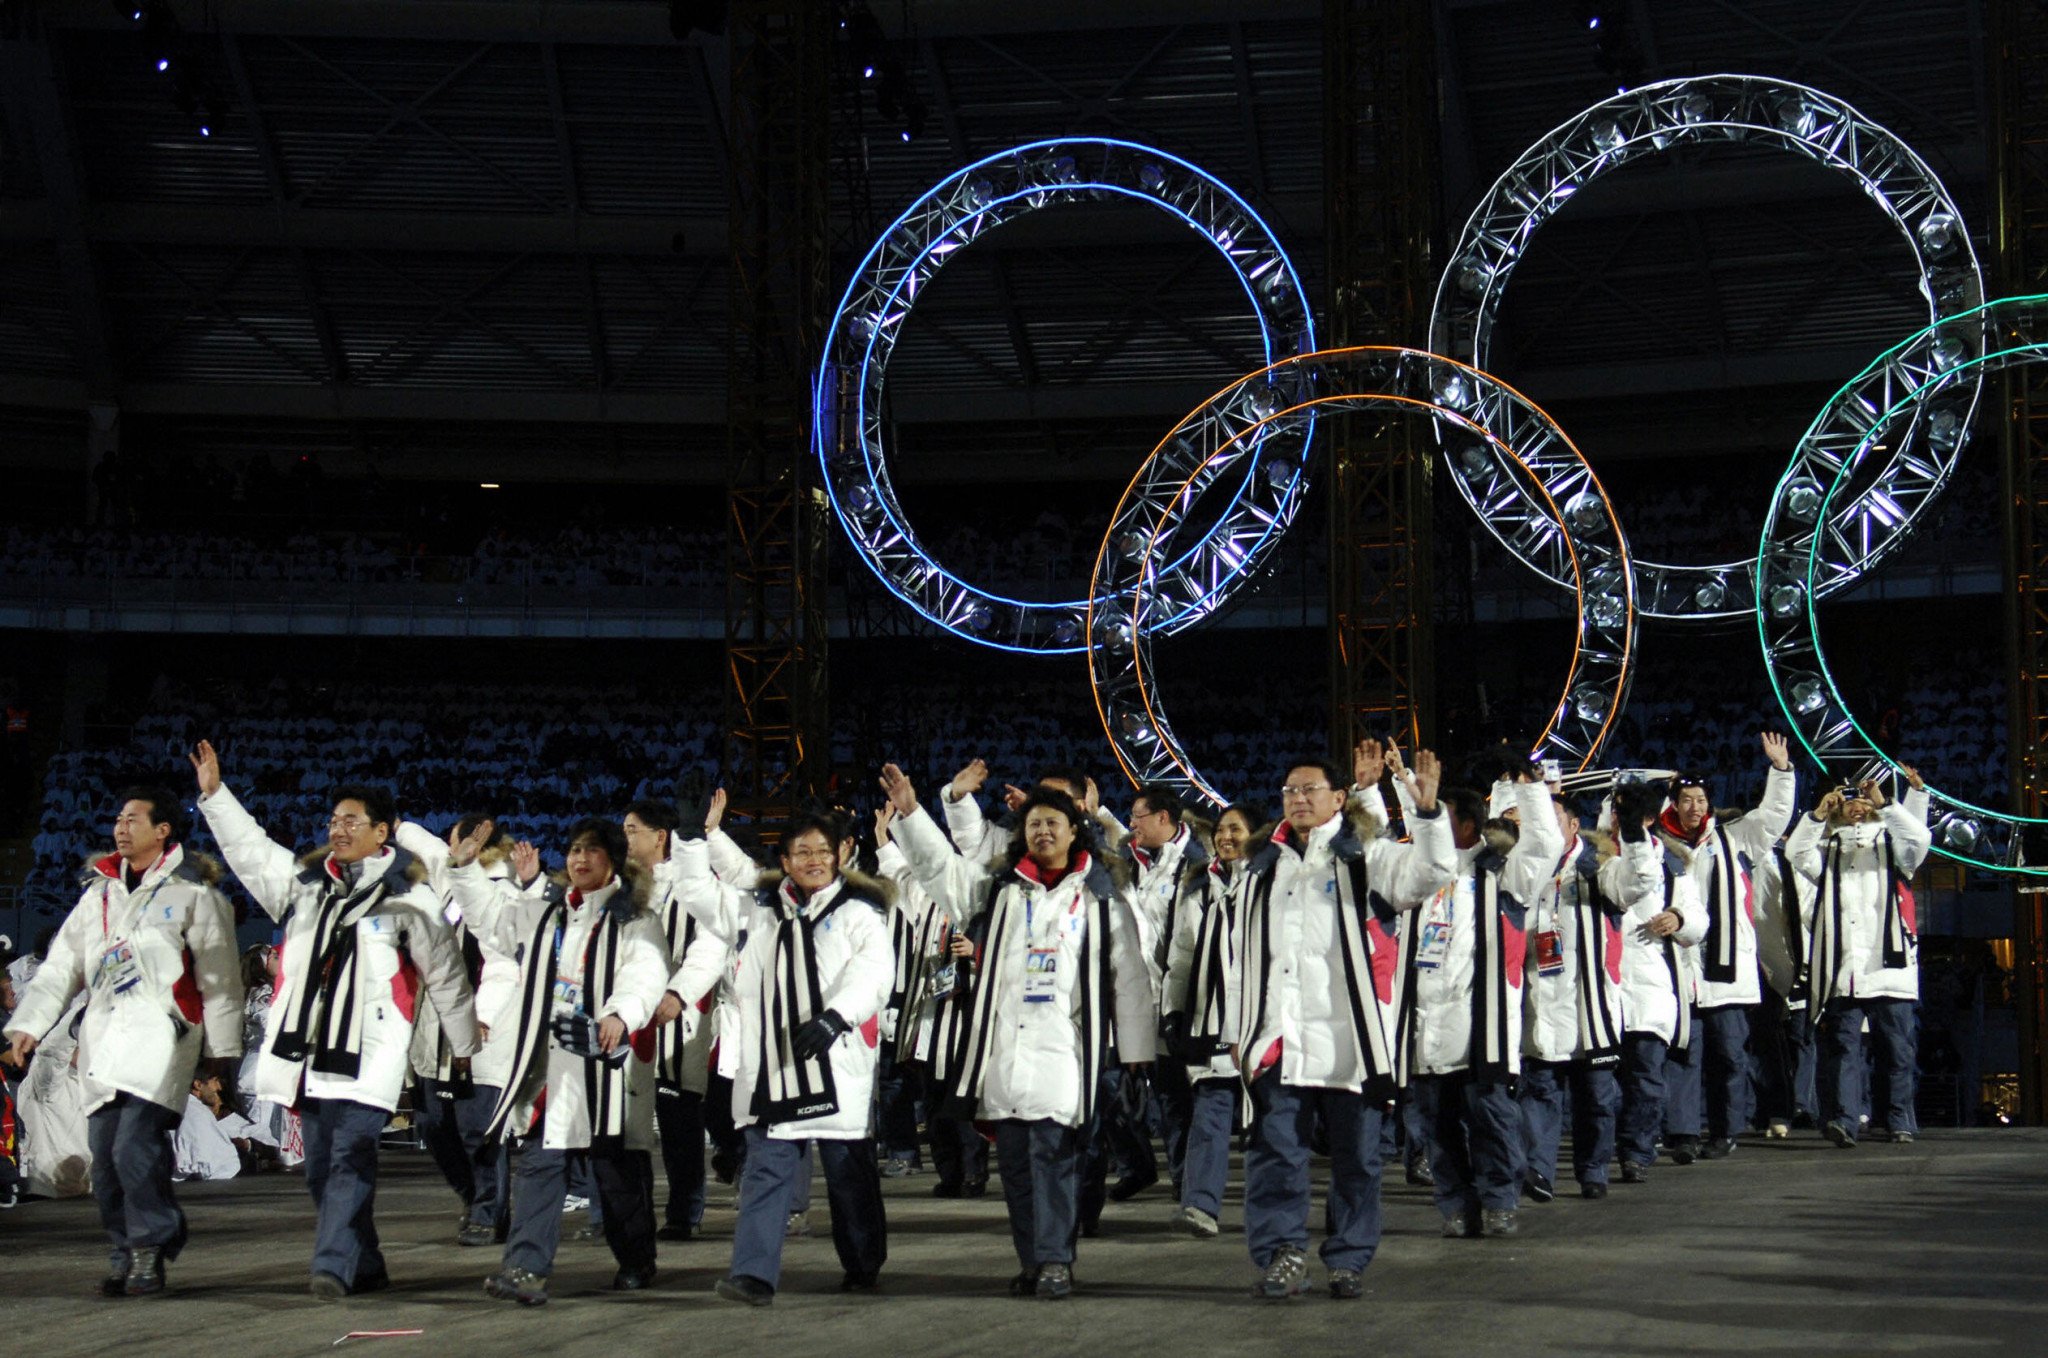 North and South Korean athletes march together at the Opening Ceremony of the Turin 2006 Winter Olympics ©Getty Images